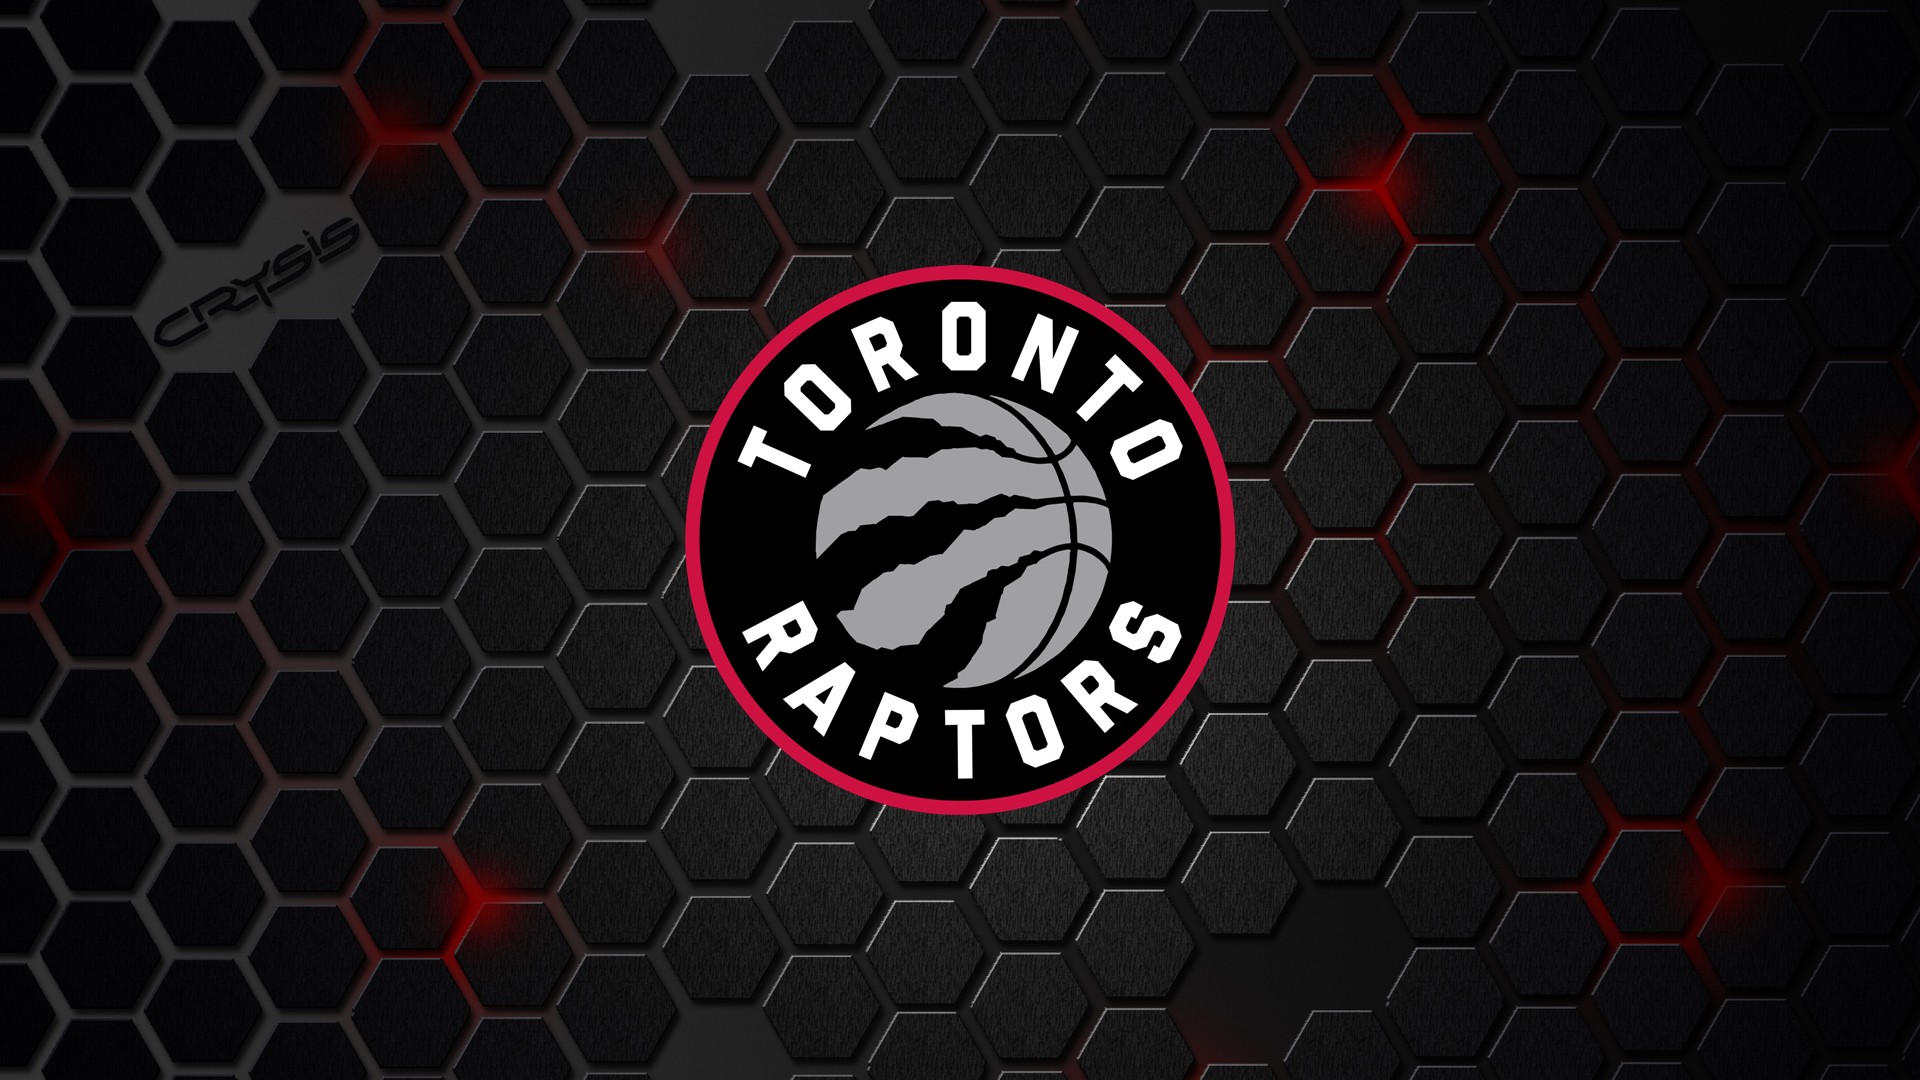 Wallpaper HD Toronto Raptors with image resolution 1920x1080 pixel. You can make this wallpaper for your Desktop Computer Backgrounds, Mac Wallpapers, Android Lock screen or iPhone Screensavers